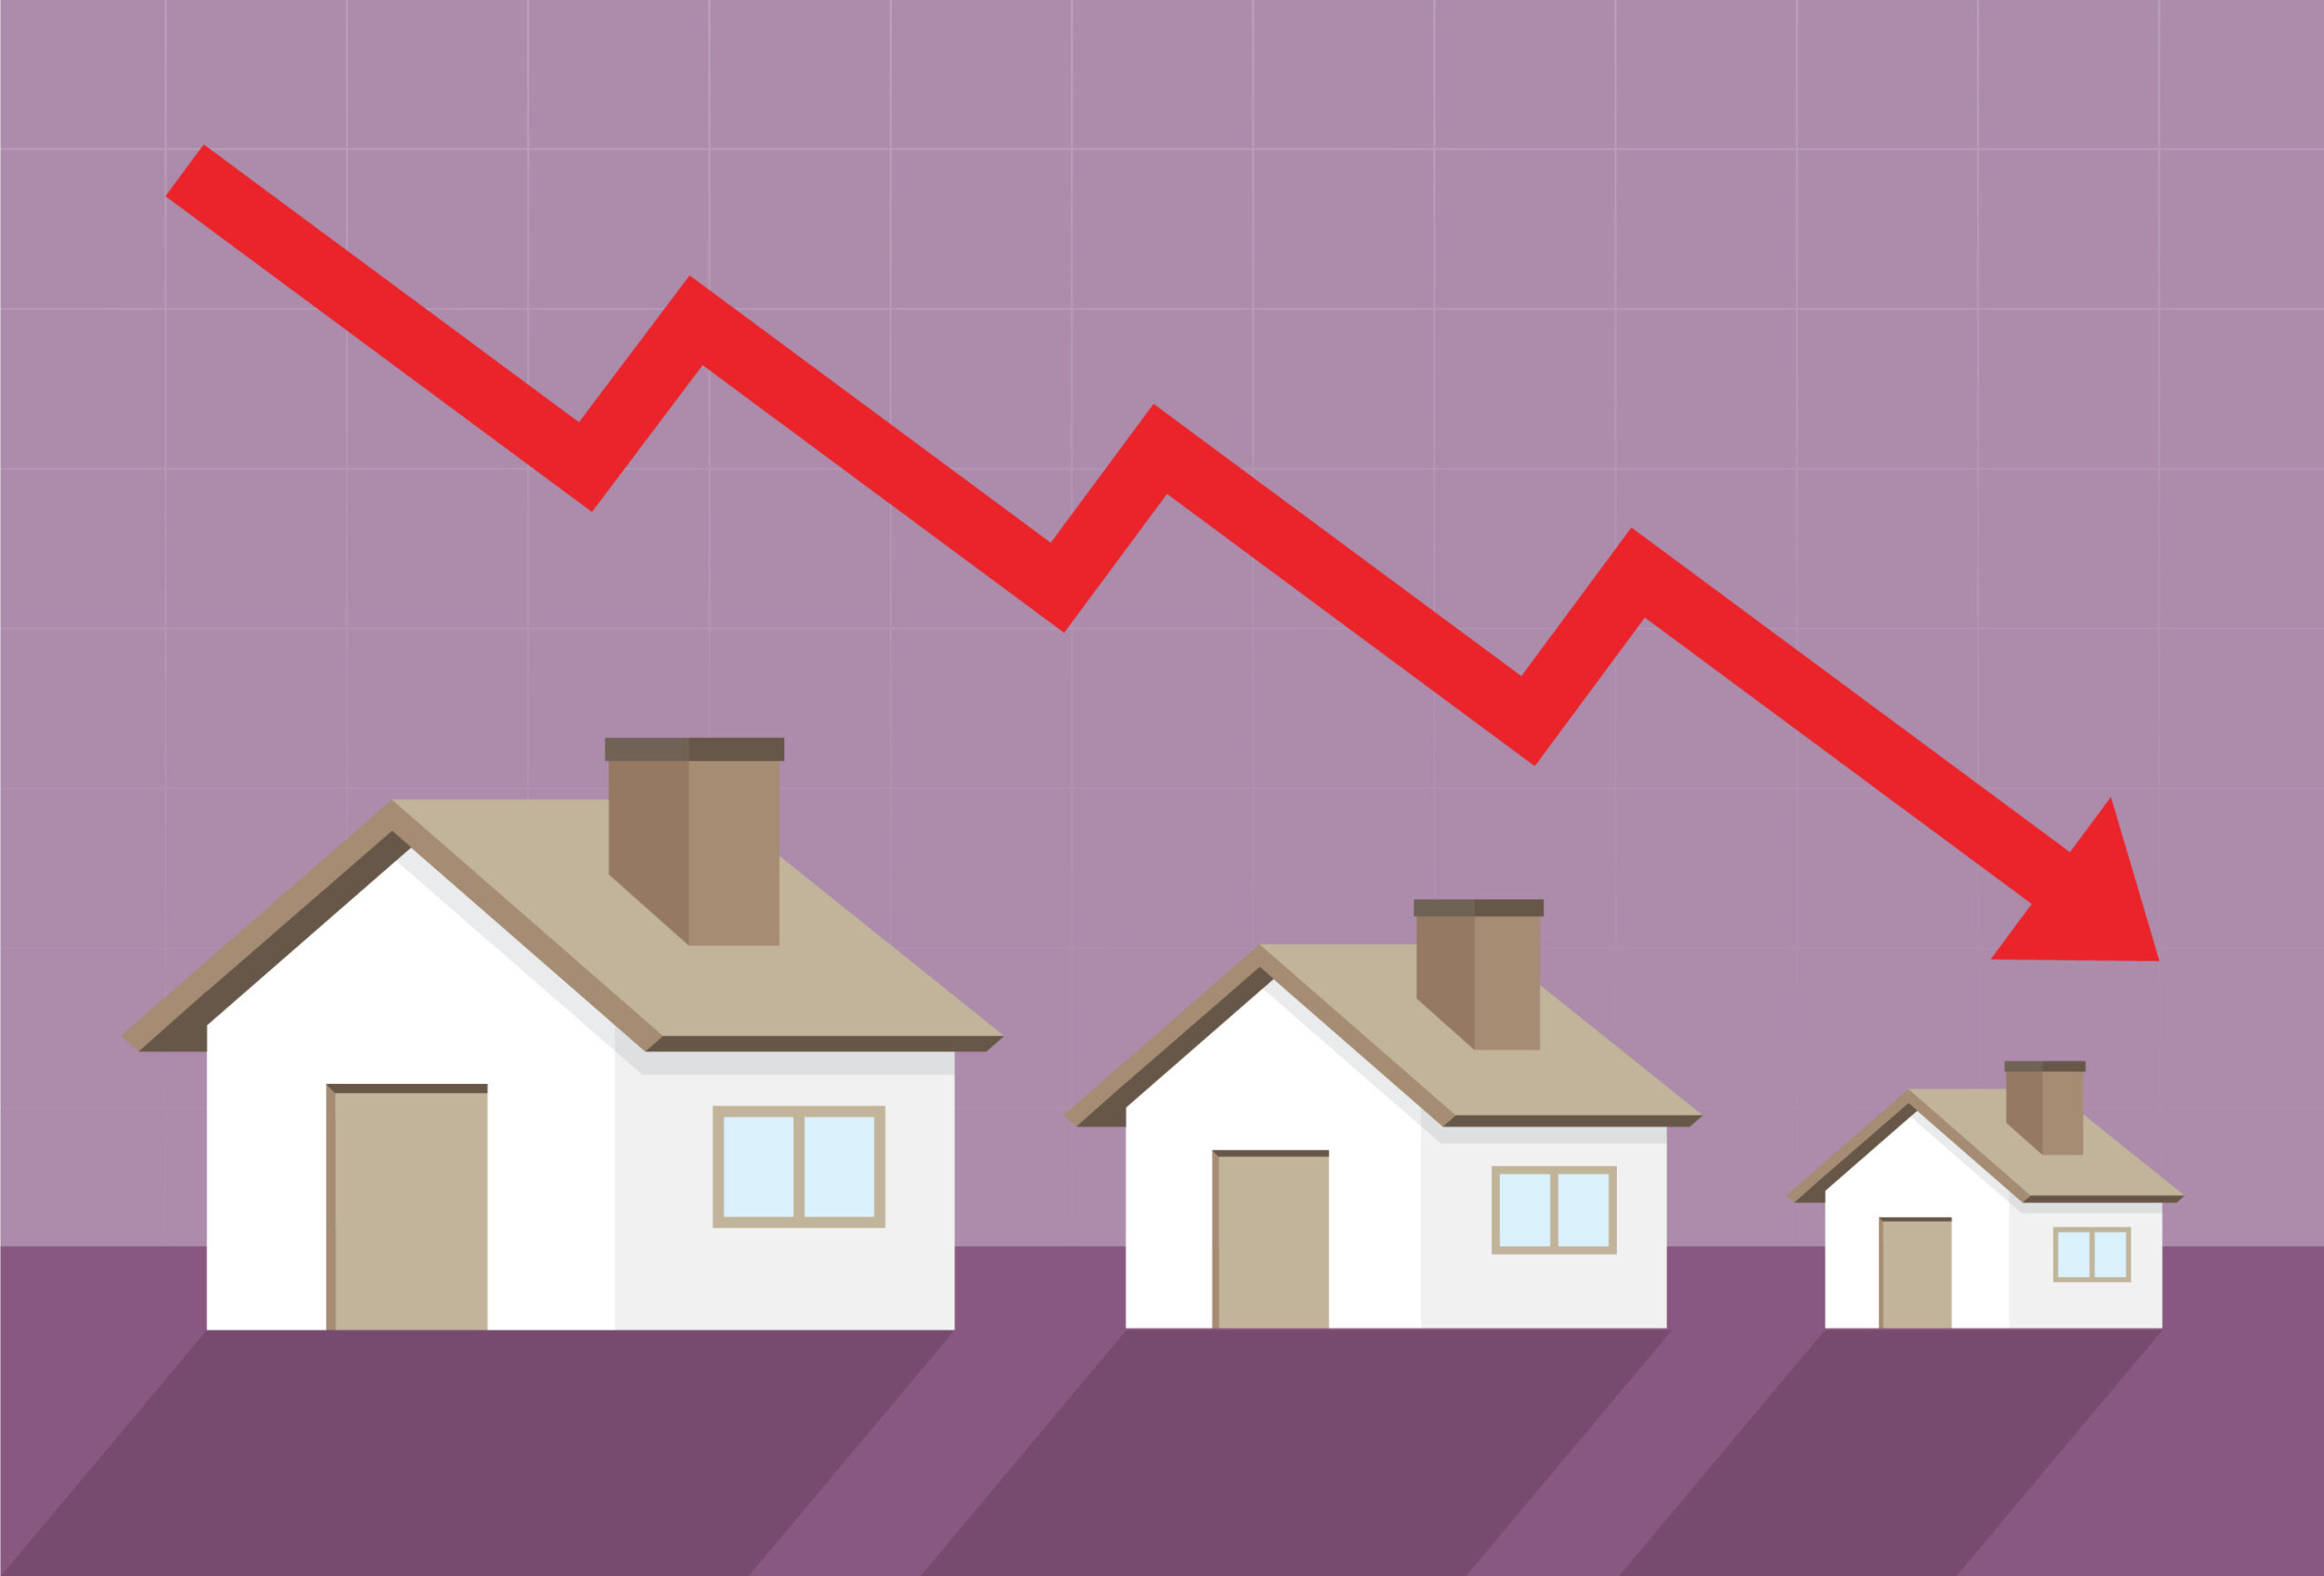 As mortgage rates rise, UK property values are anticipated to decline